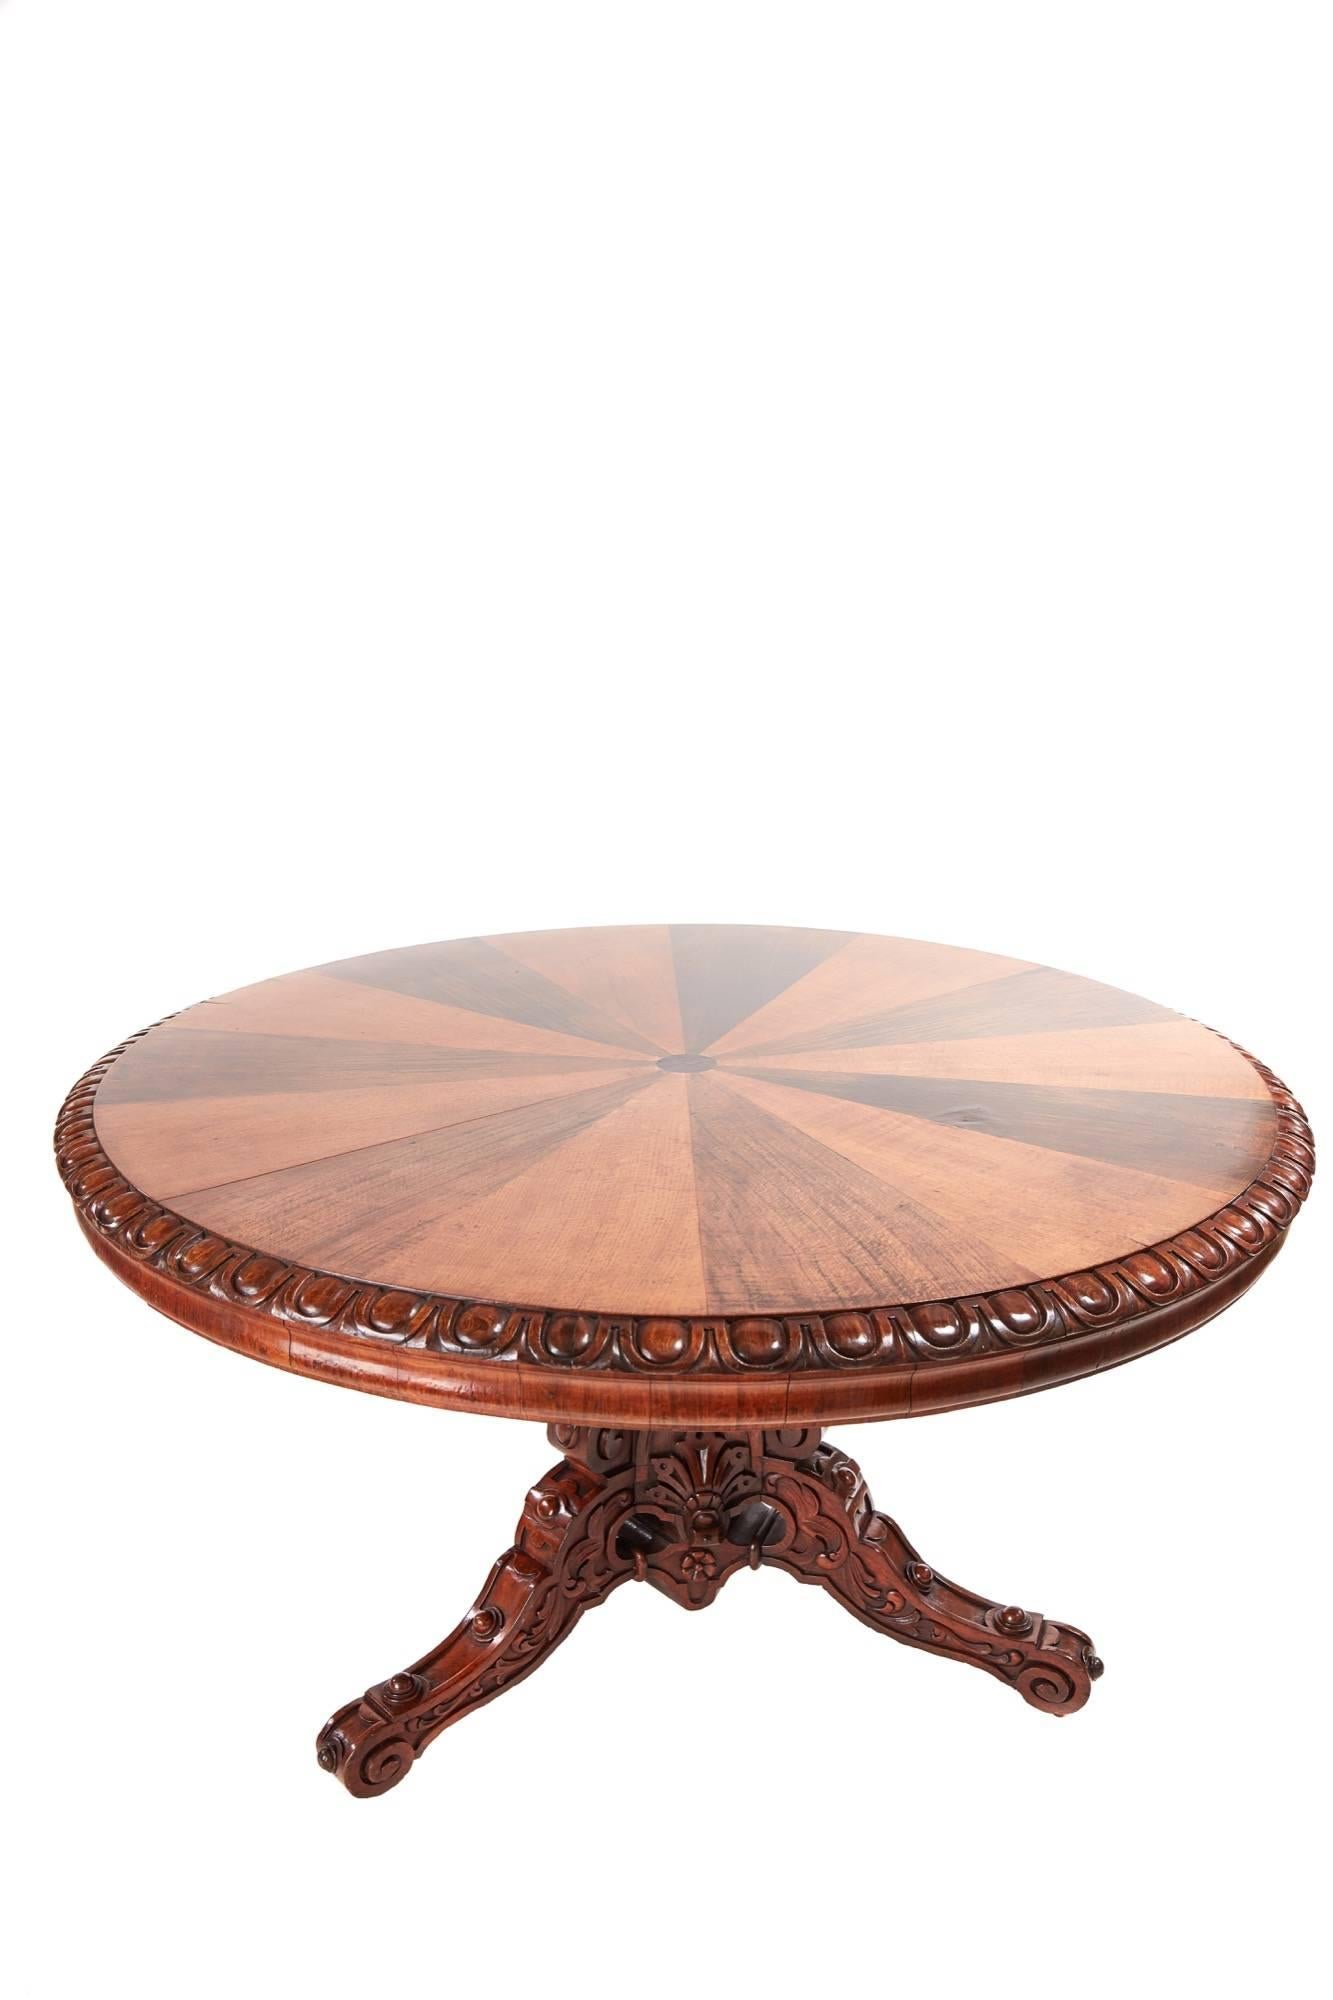 A rare specimen centre table, a large round Victorian specimen centre table with segmented oak and walnut top, lovely carved edge, unusual shaped apron, raised on a decoratively carved oak and walnut triform base with carved pedestal and three